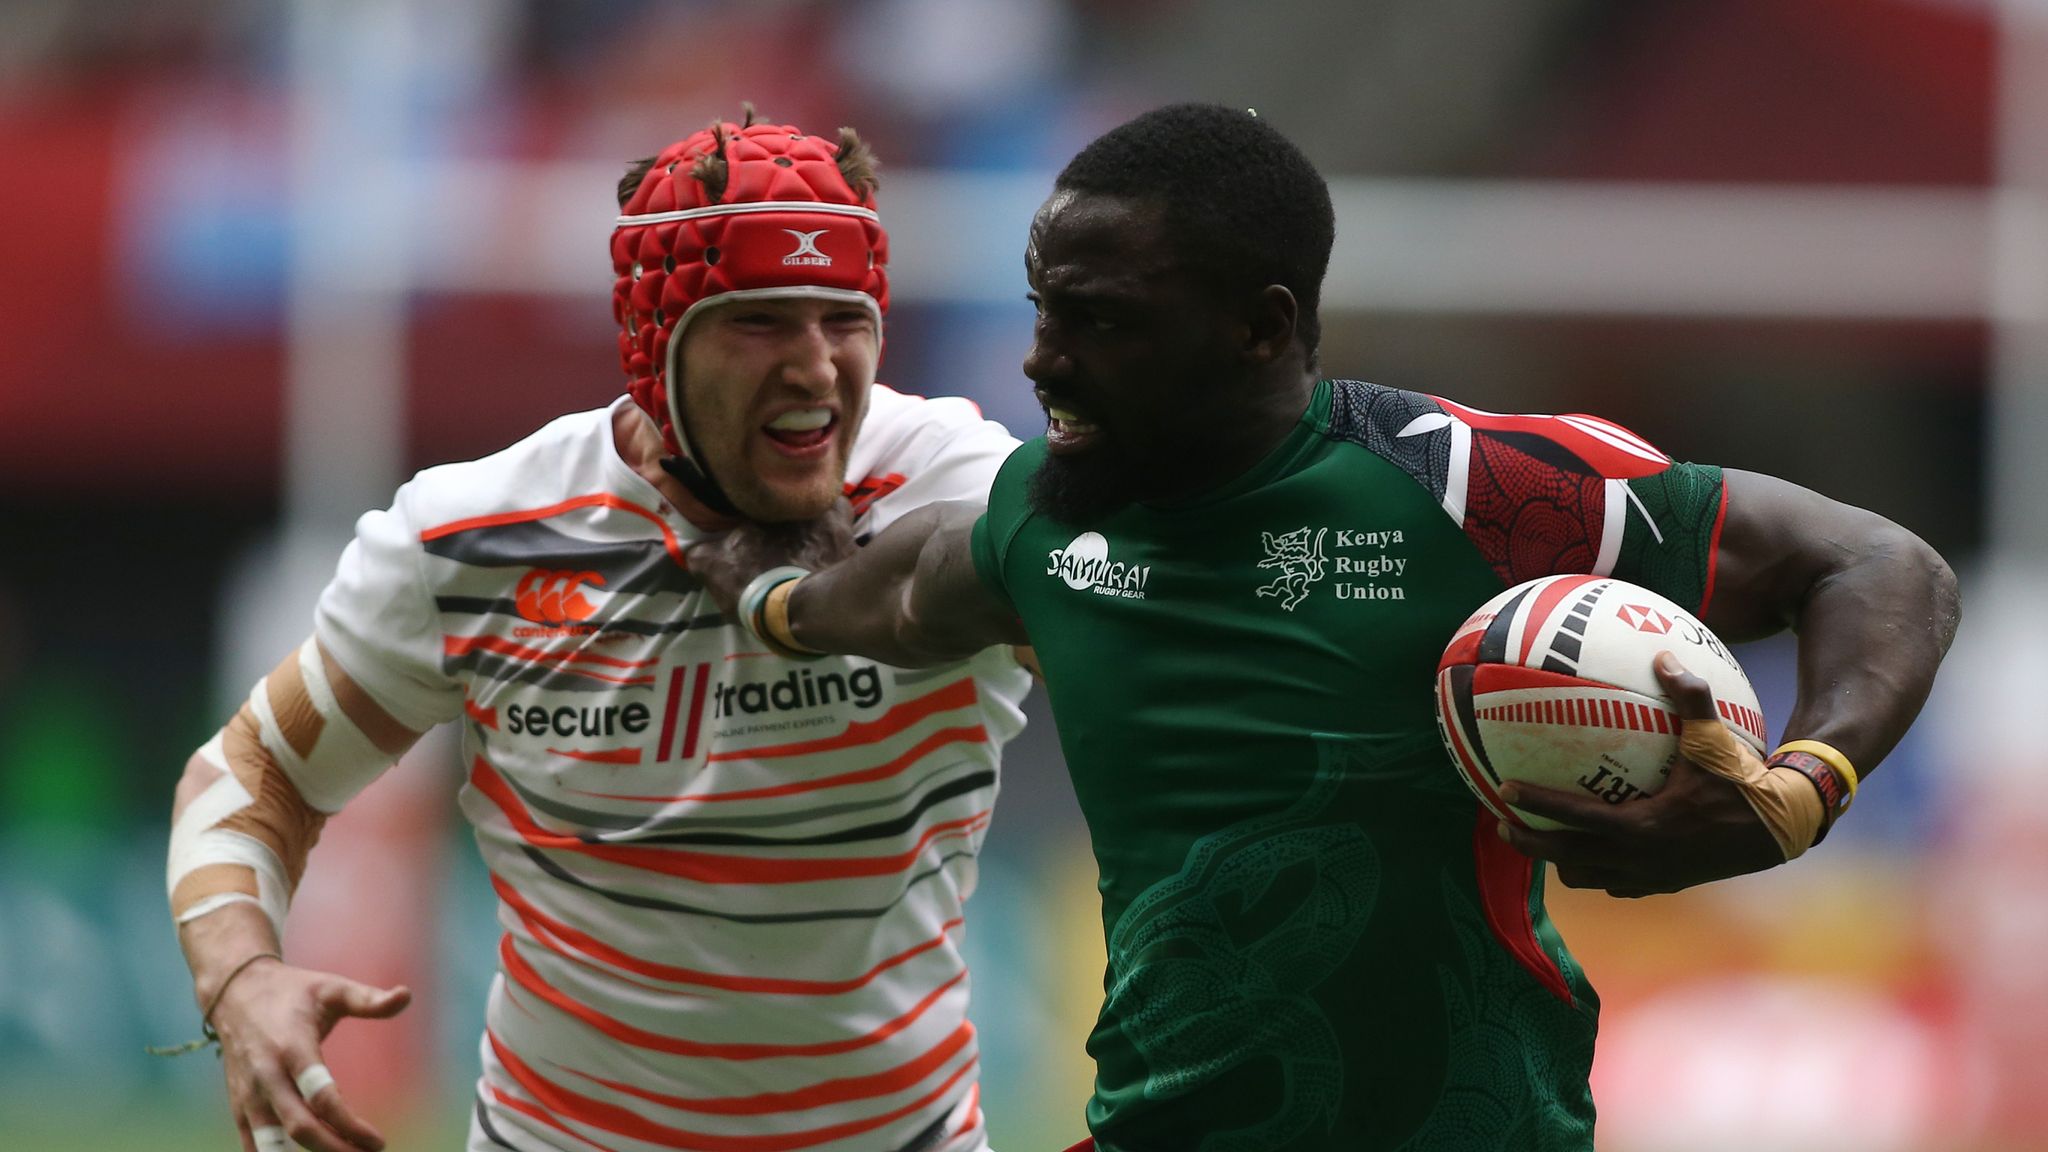 England Sevens lose HSBC World Rugby Sevens quarter-final to Kenya in Vancouver Rugby Union News Sky Sports